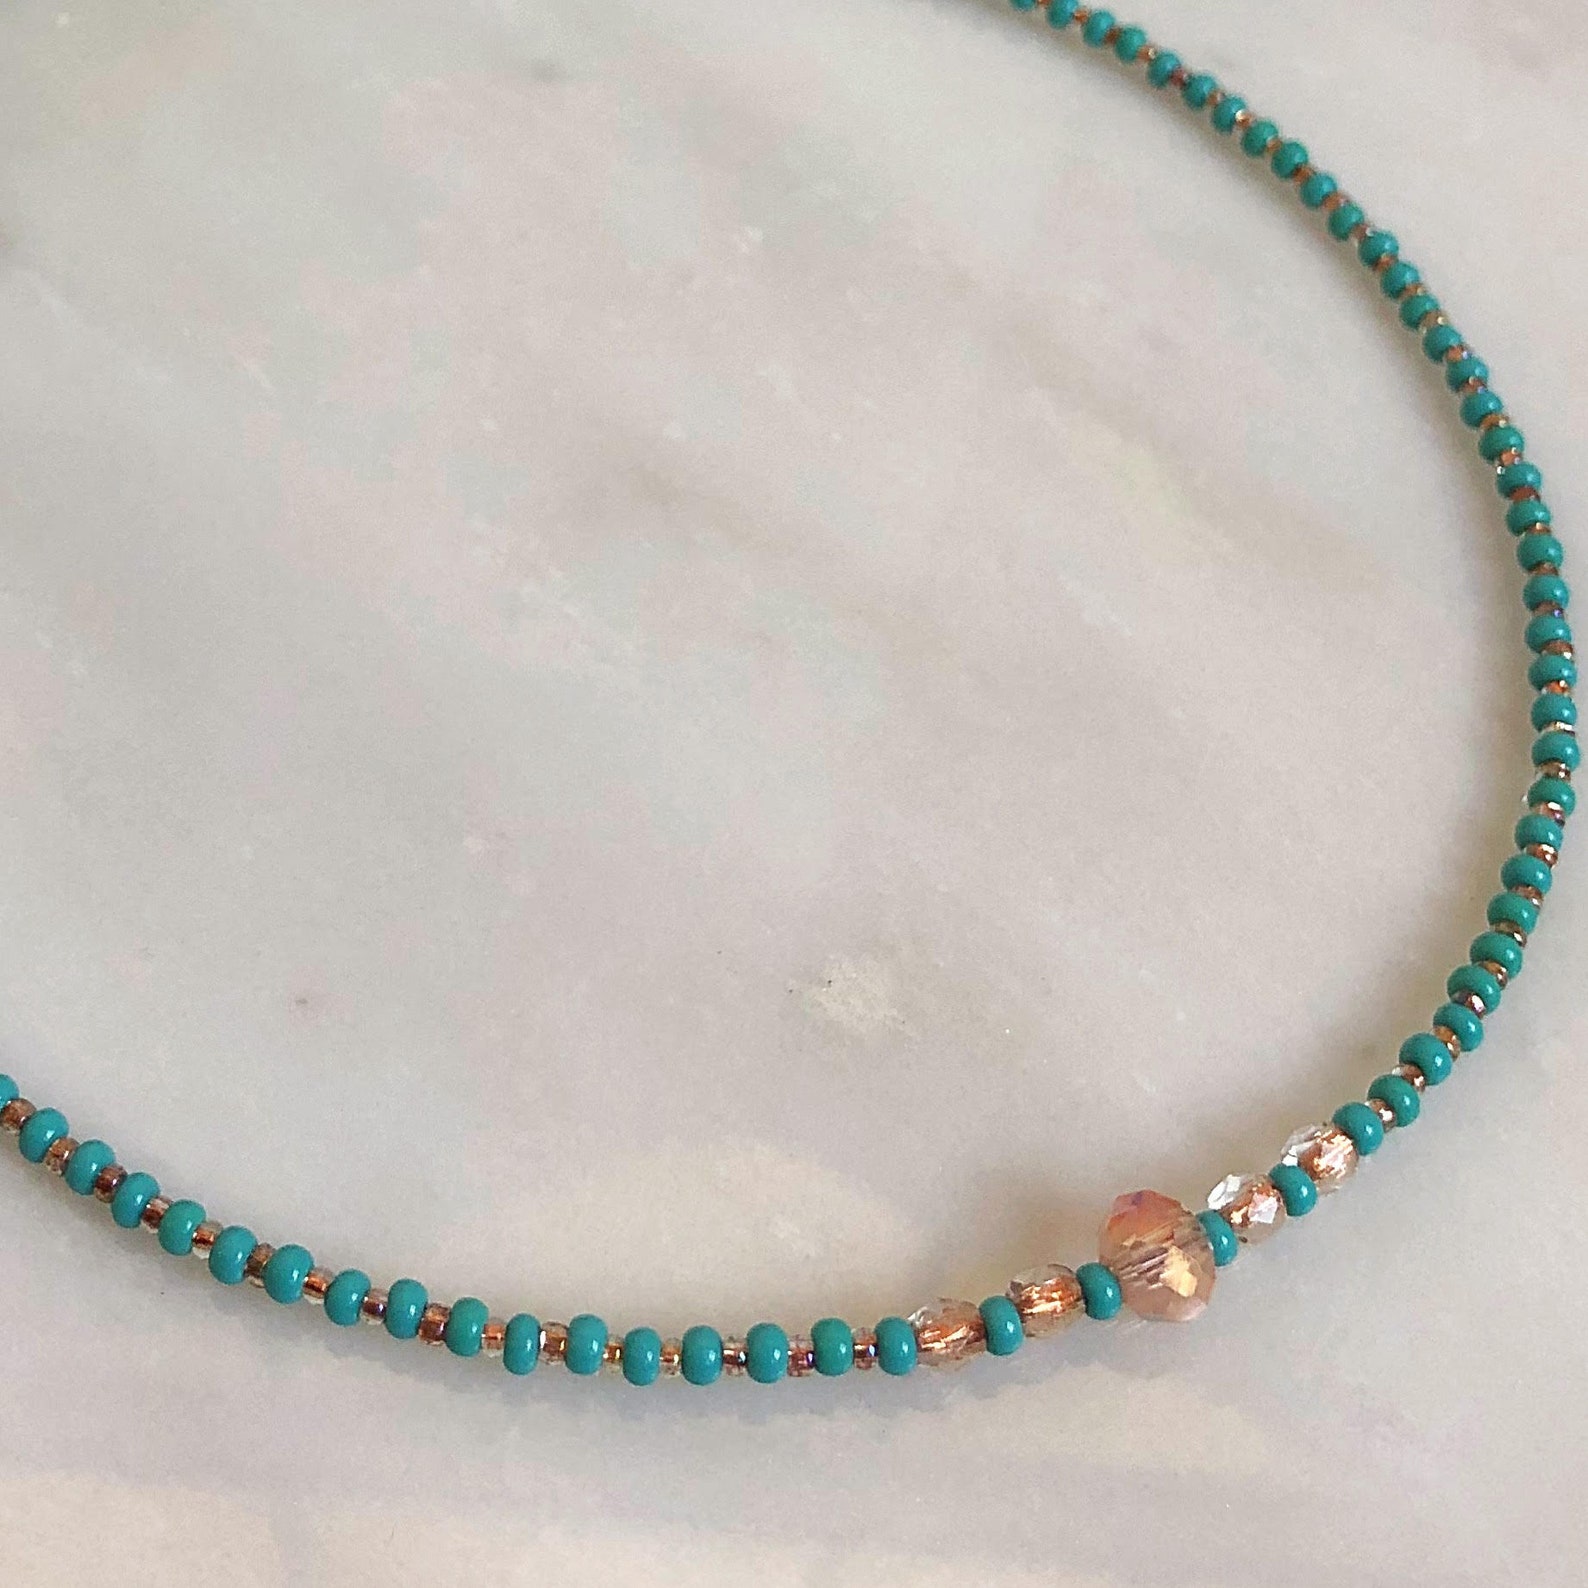 Turquoise beaded necklace Turquoise seed bead necklace | Etsy